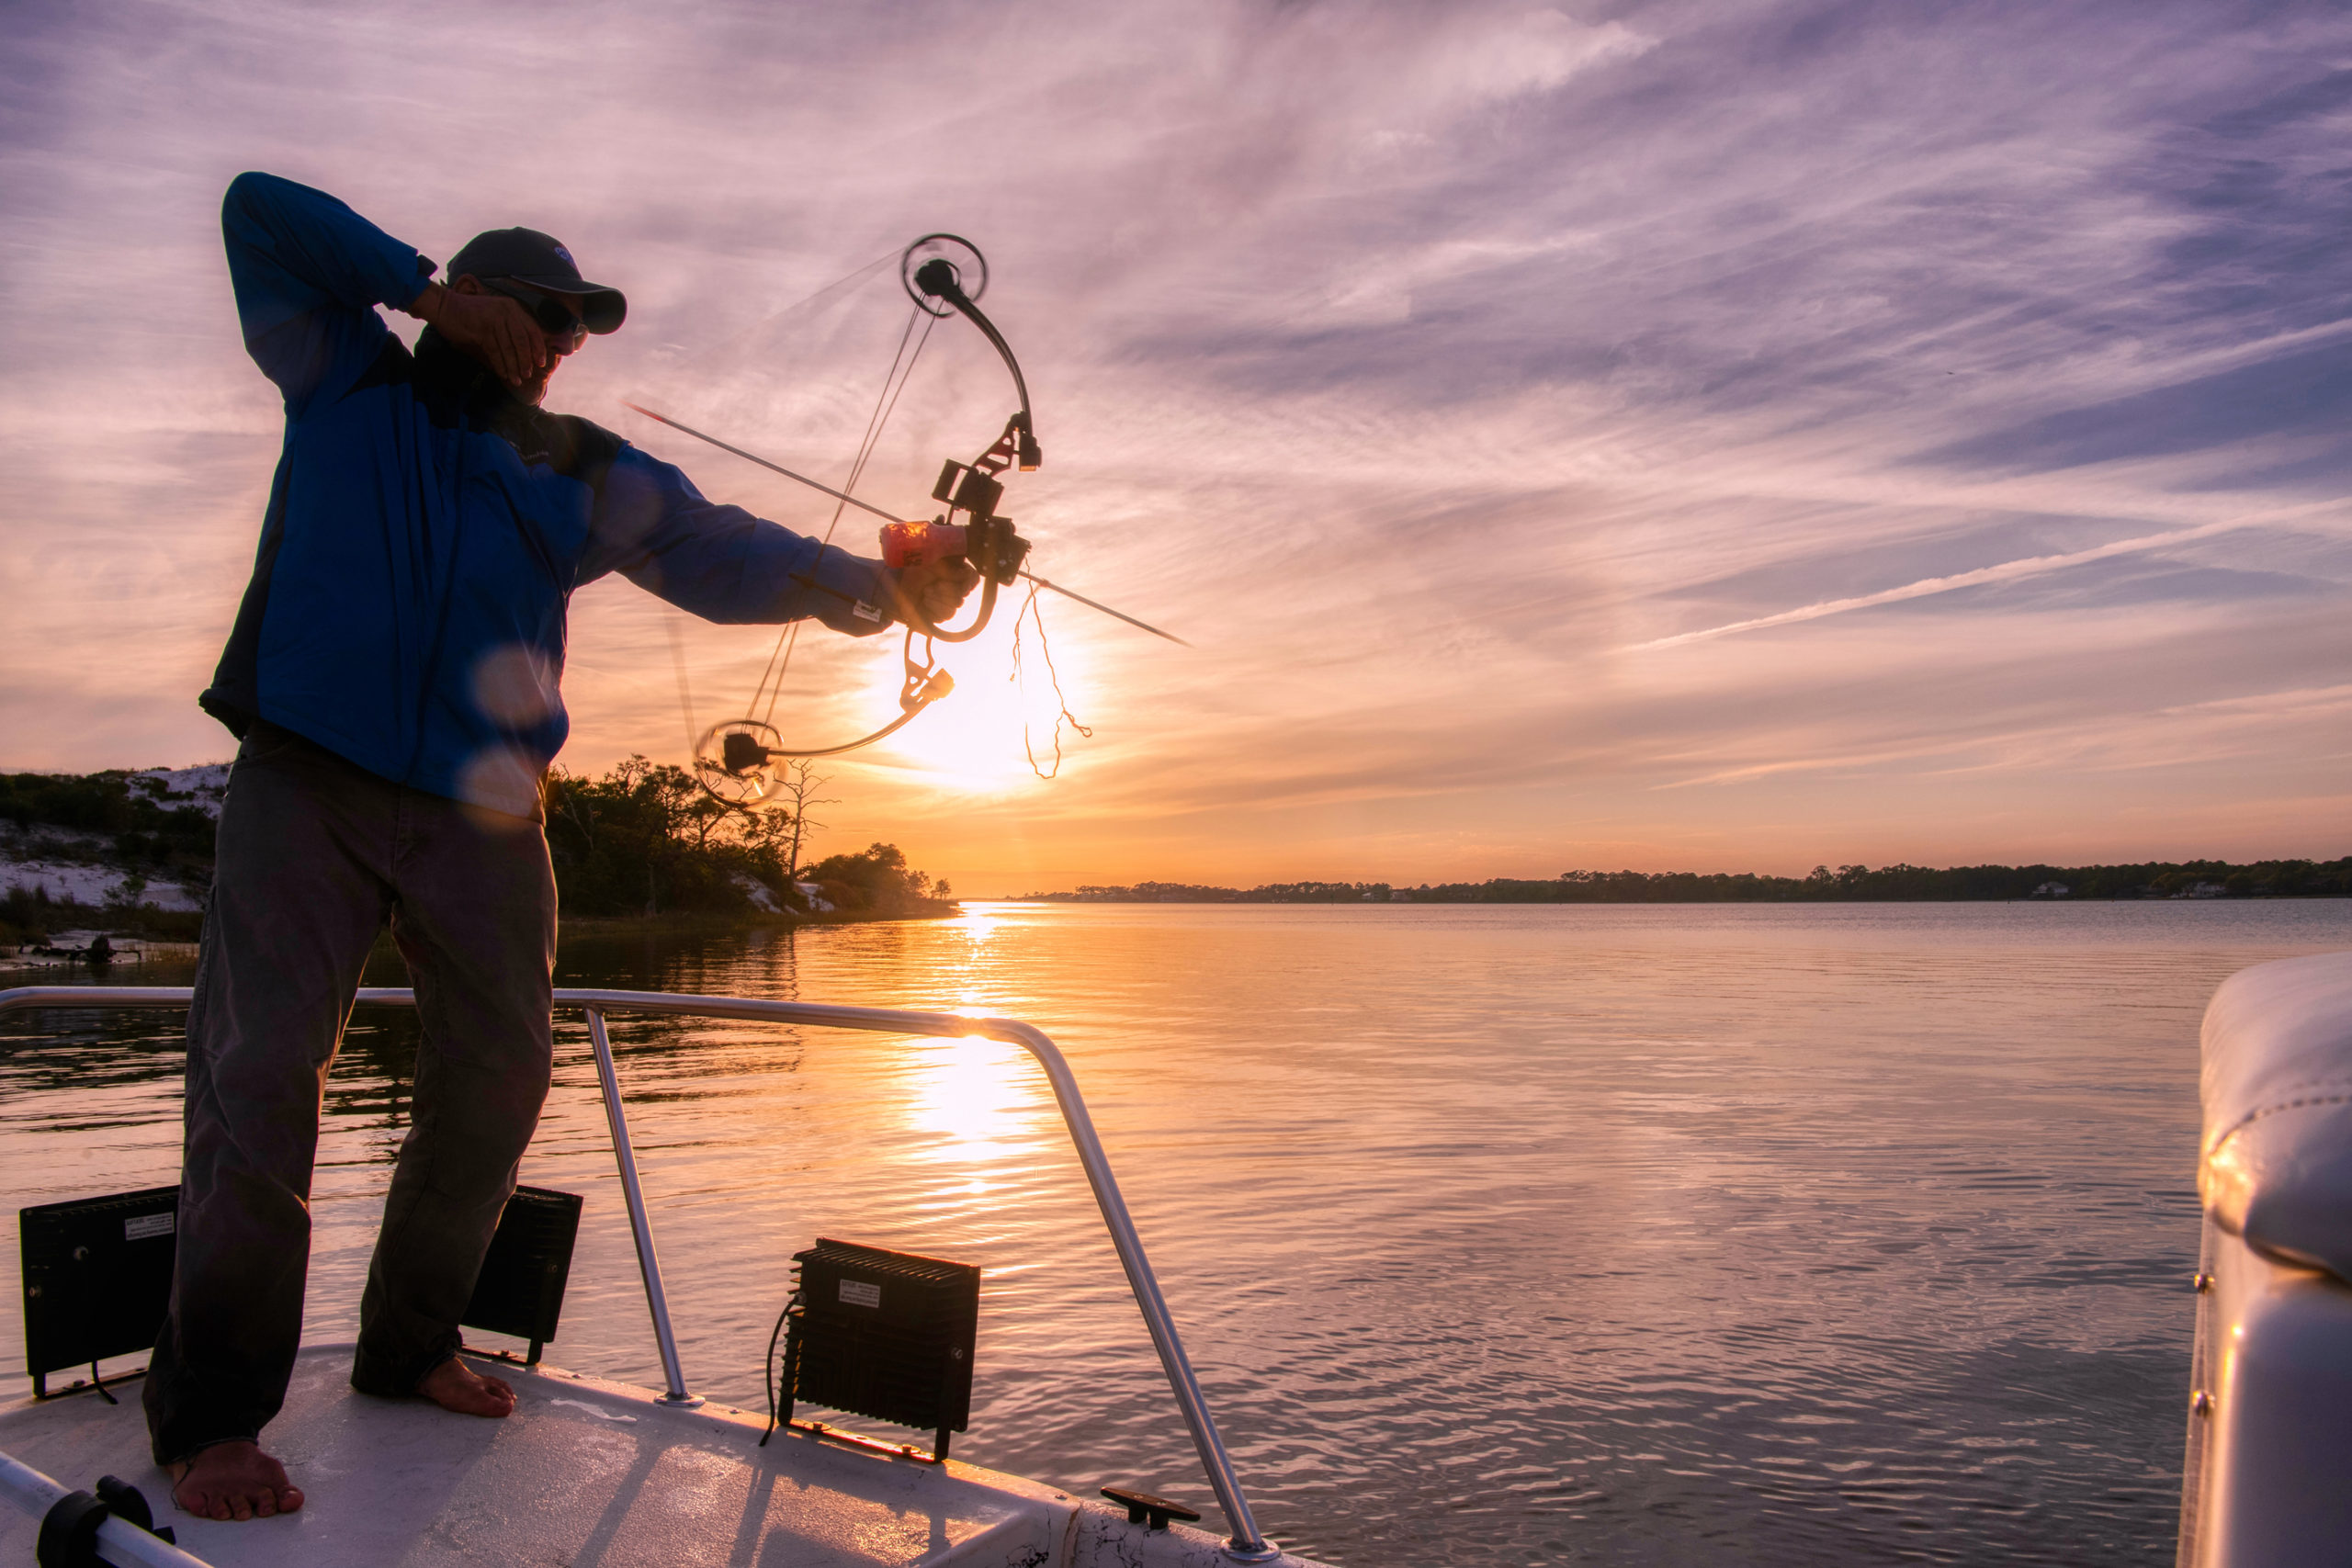 Florida Bowfishing - Tips to Get Started ~ Panhandle Fishing Charters